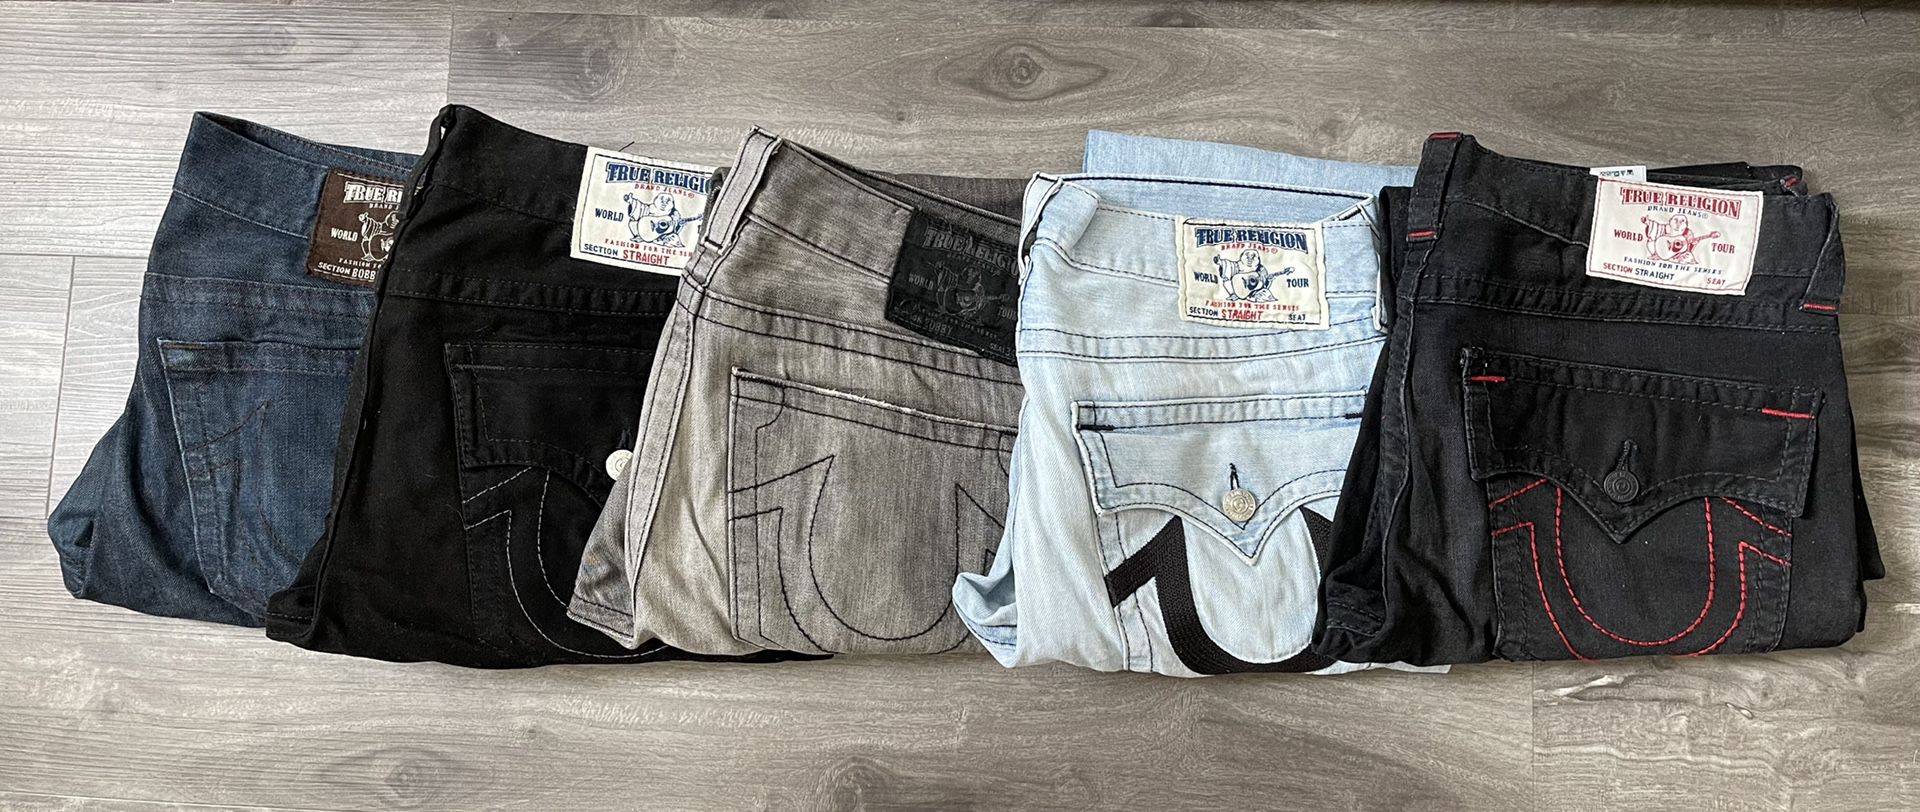 True Religion Jeans (5pairs) 2 Bobby / 3 Straight Fit 